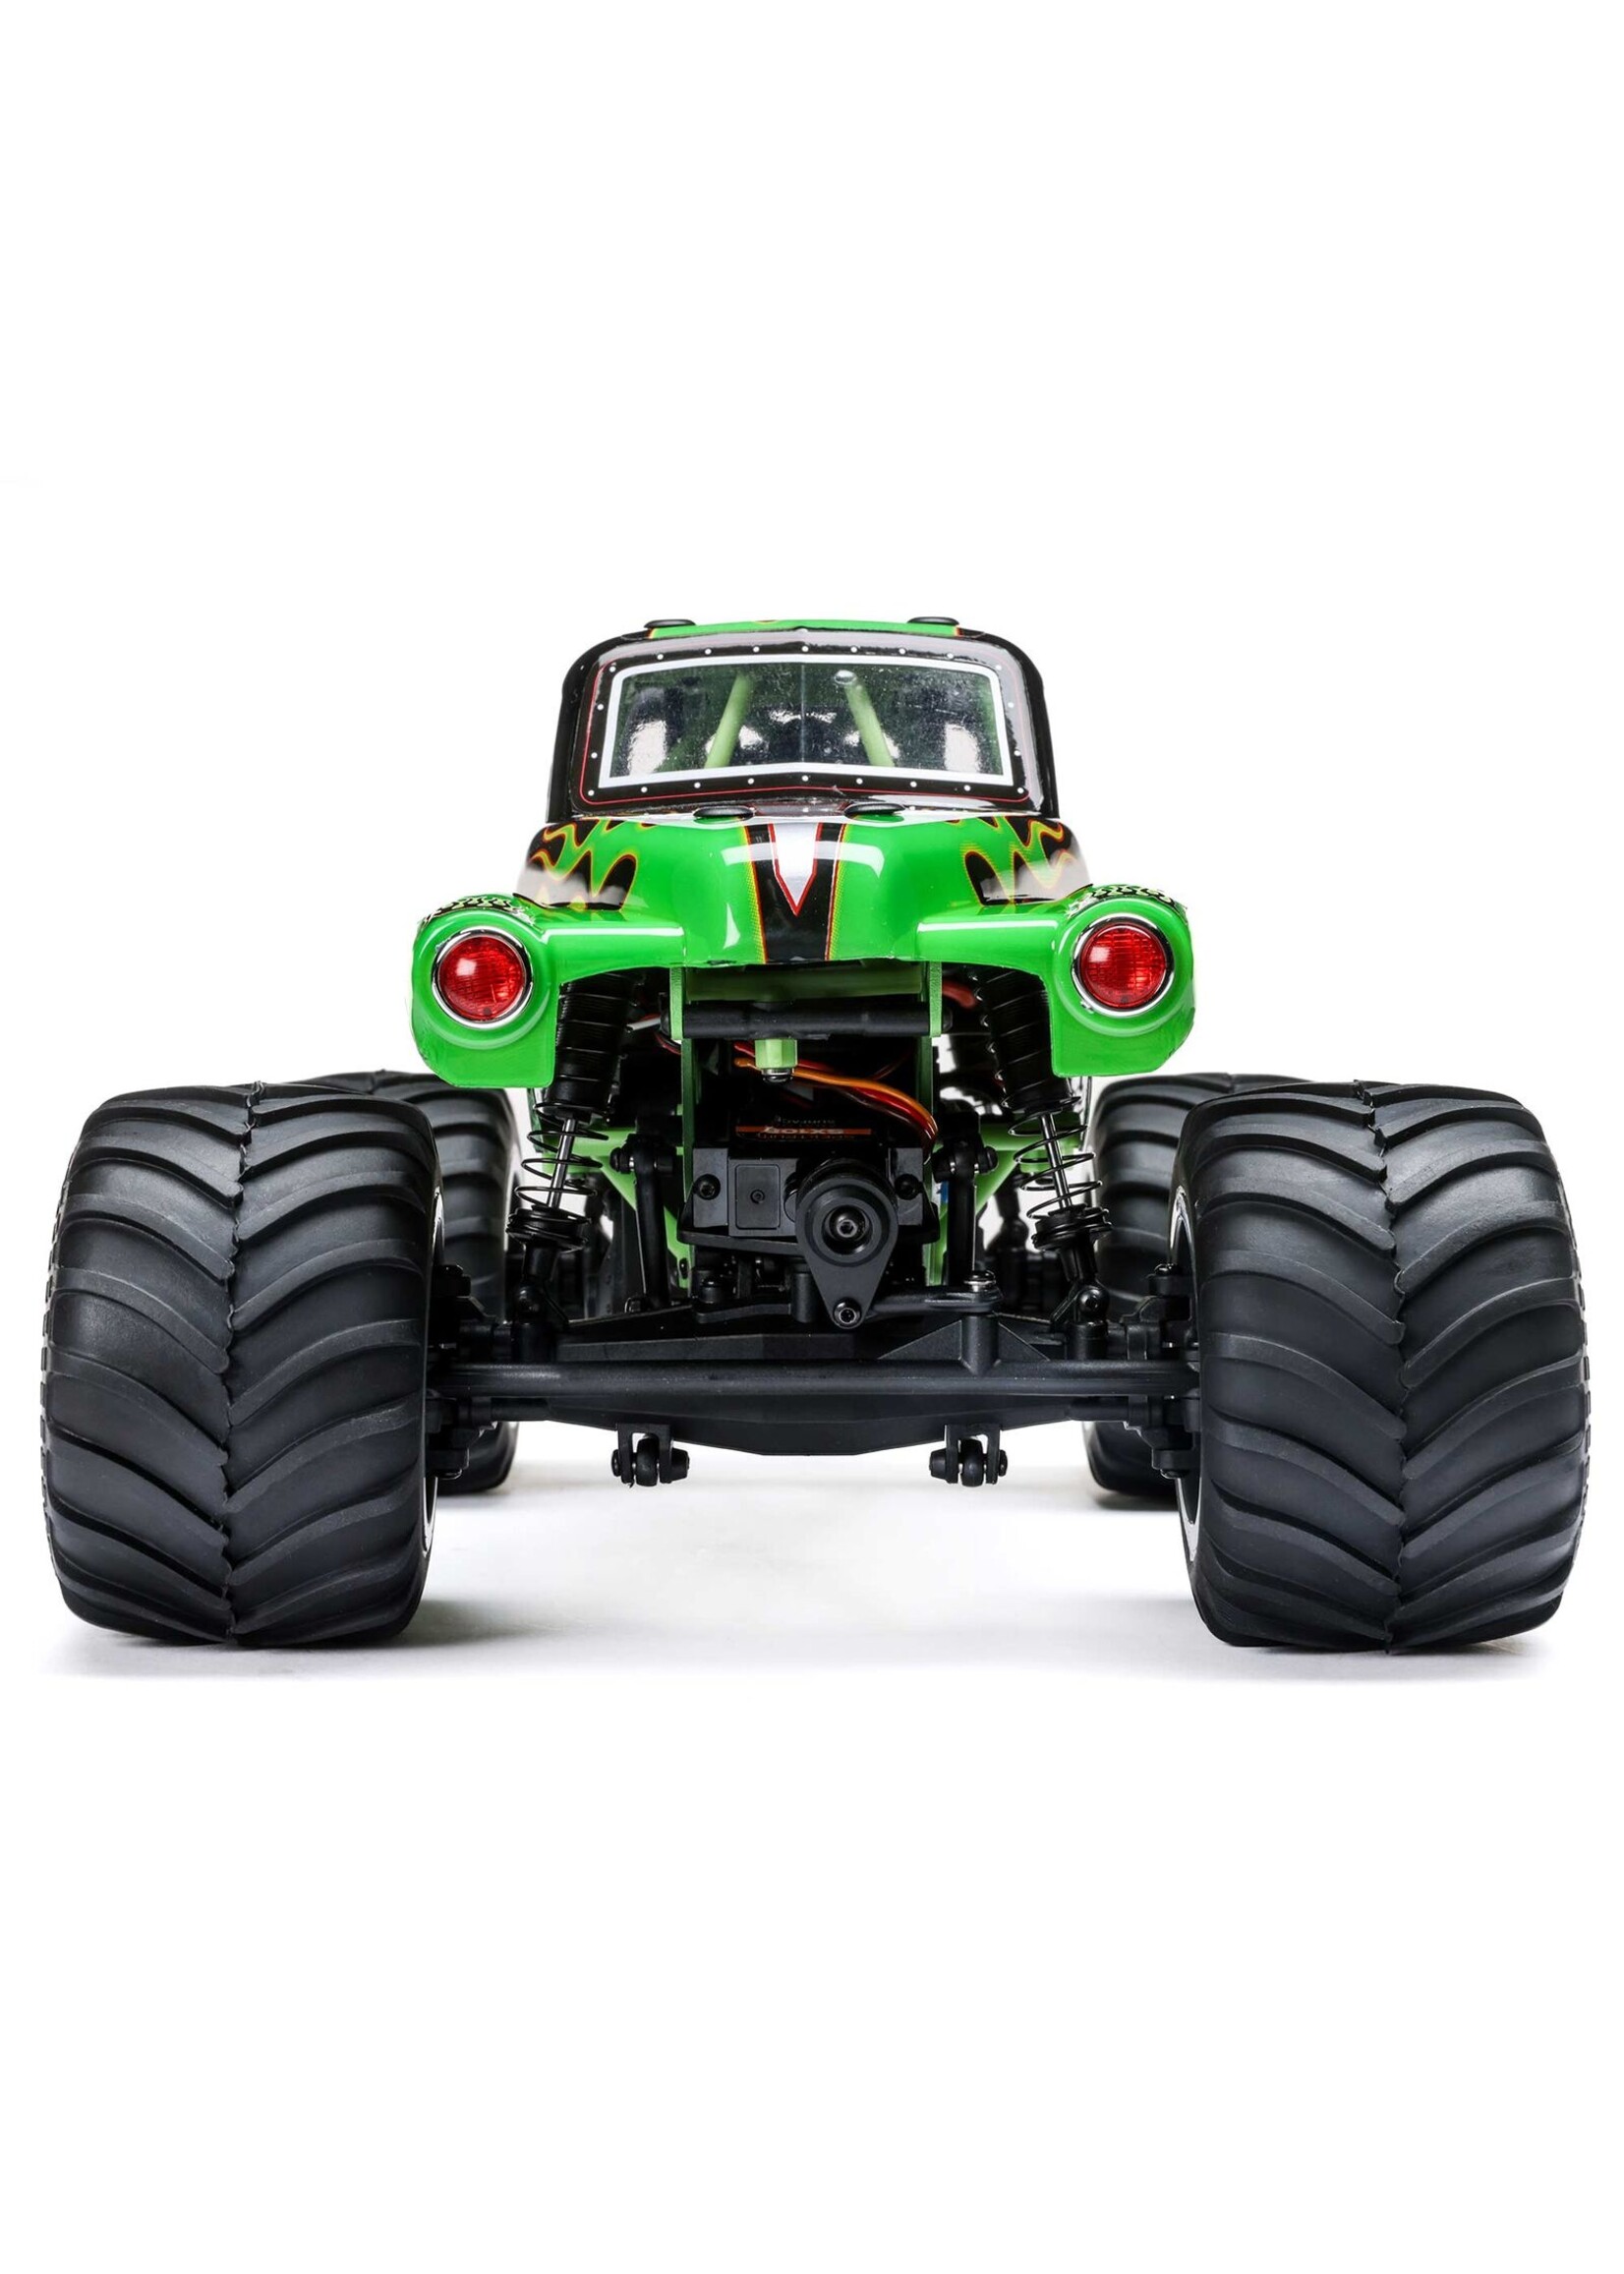 Losi LOS01026T1 - Mini LMT 4WD Brushed RTR Monster Truck Grave Digger